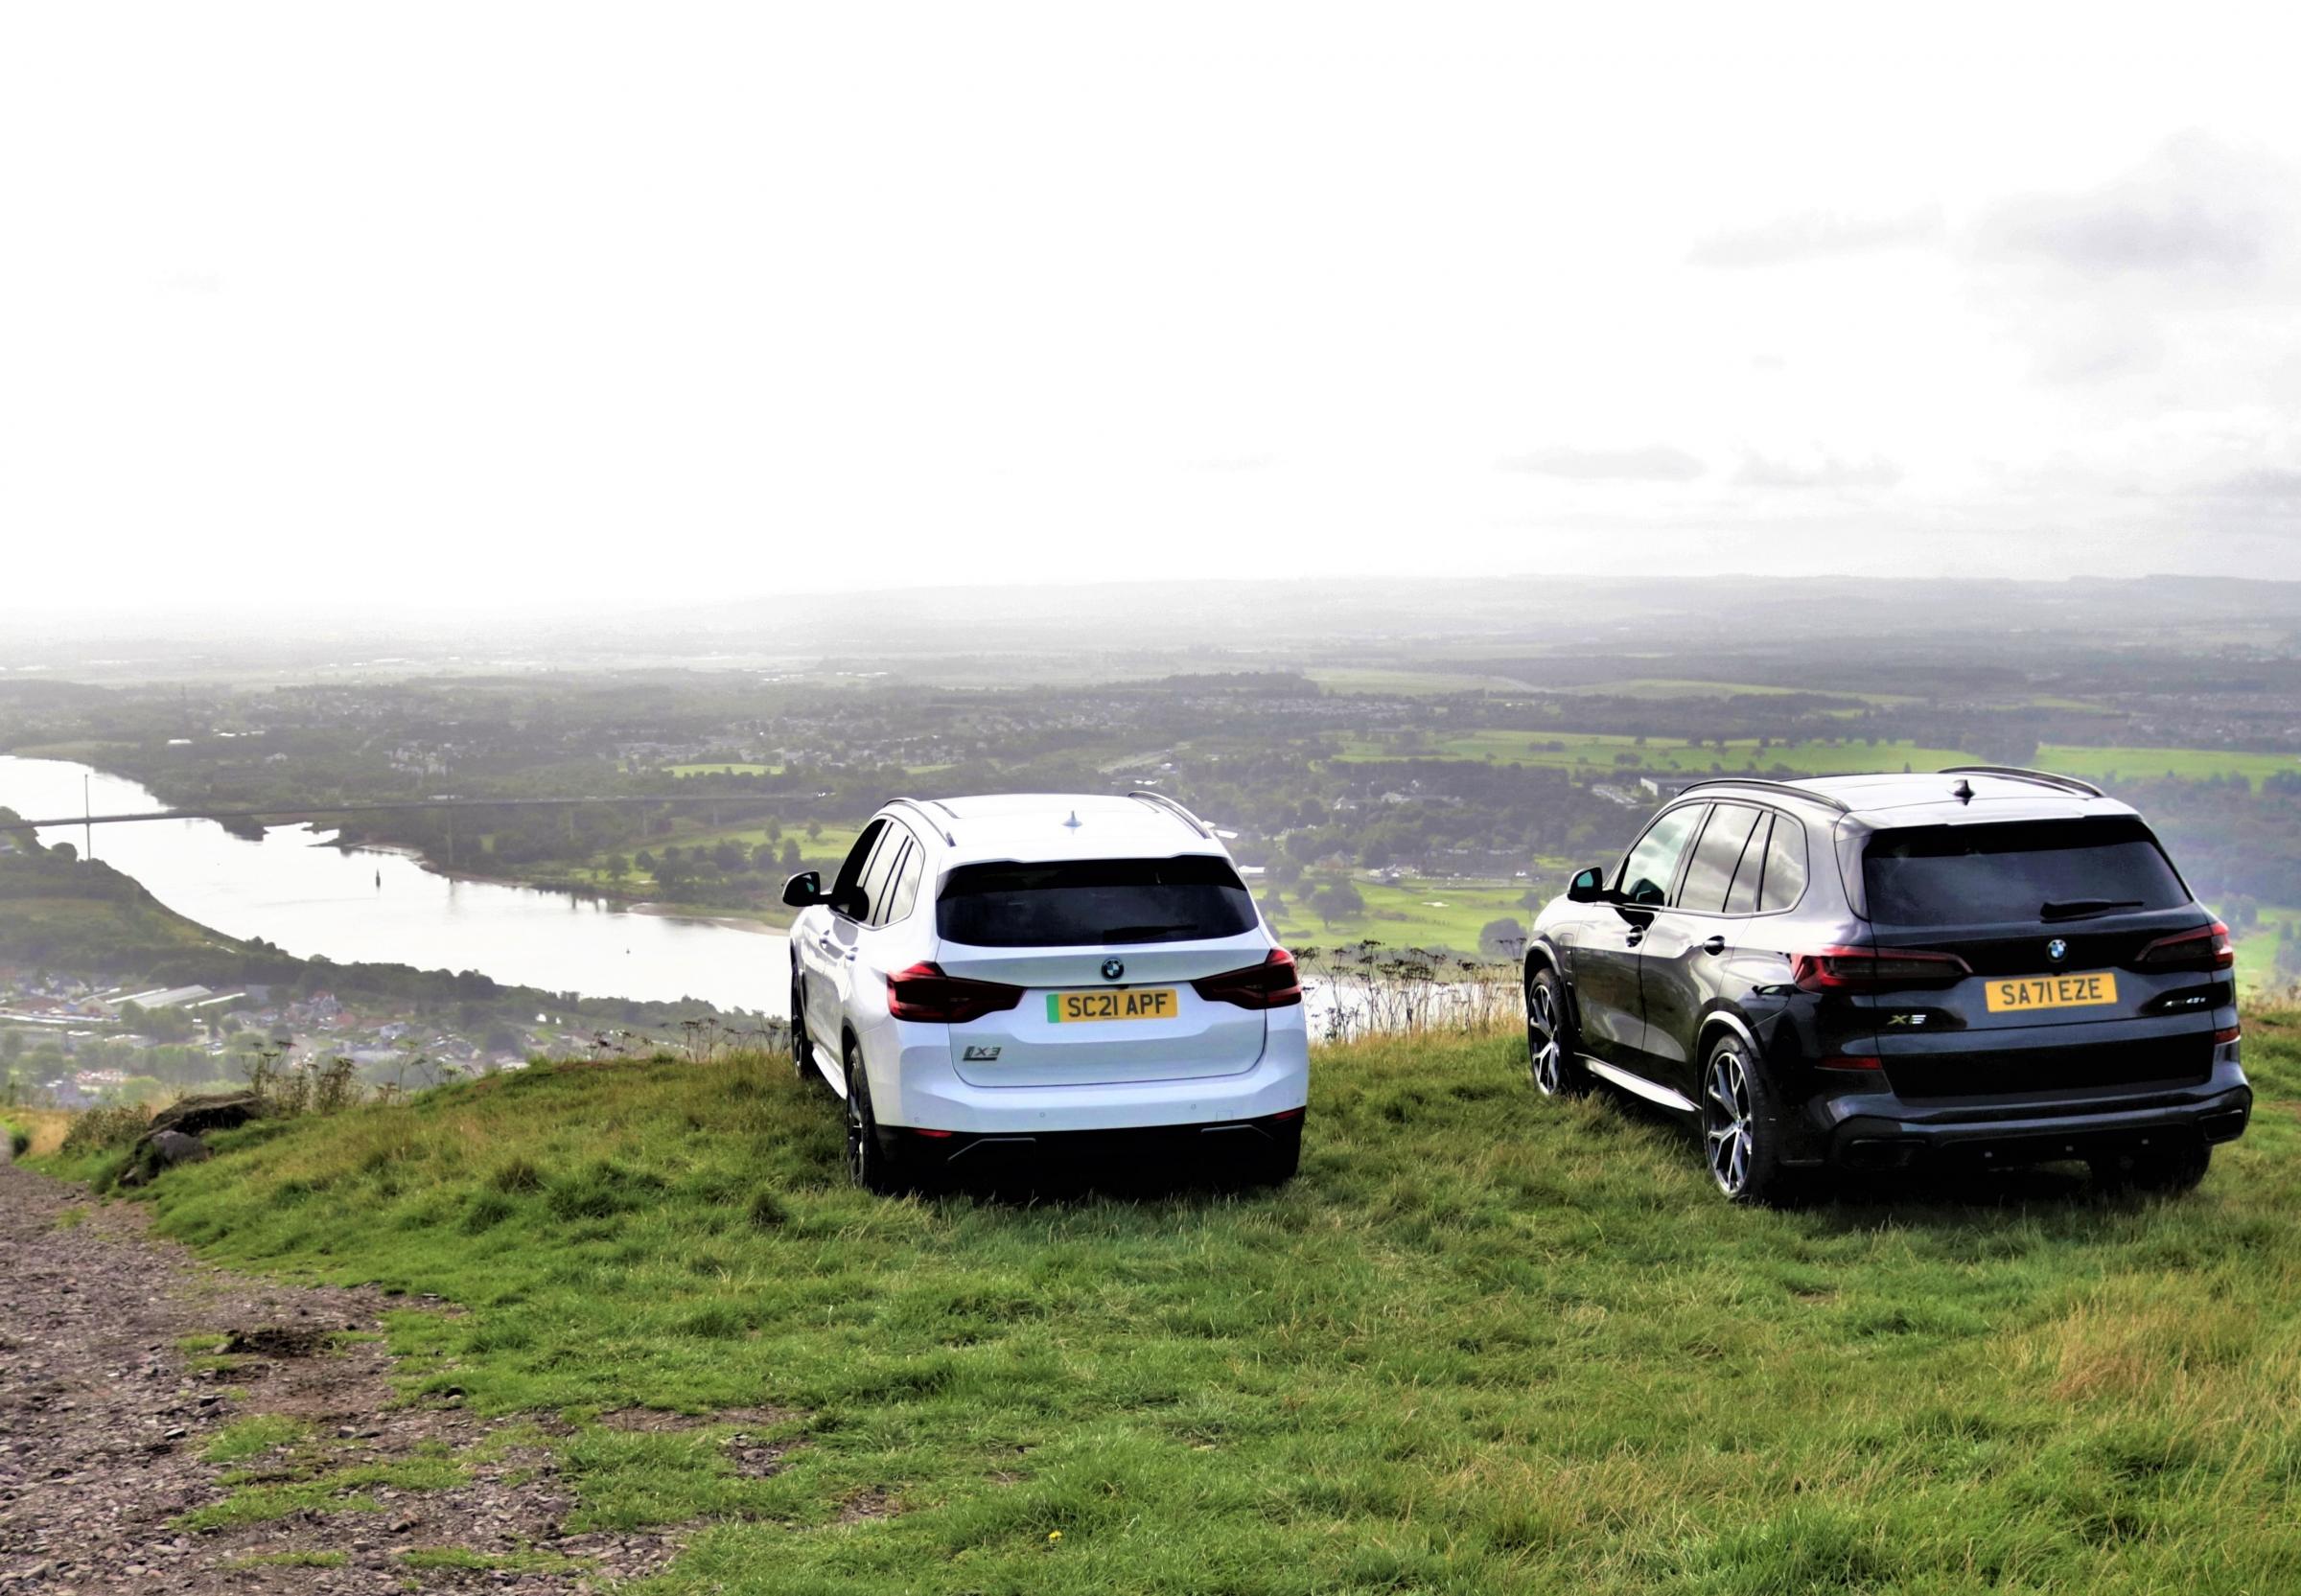 Cars with a view - the new BMWs will provide a new enviromentally friendly edge ot Alex Flemings holdiay homes